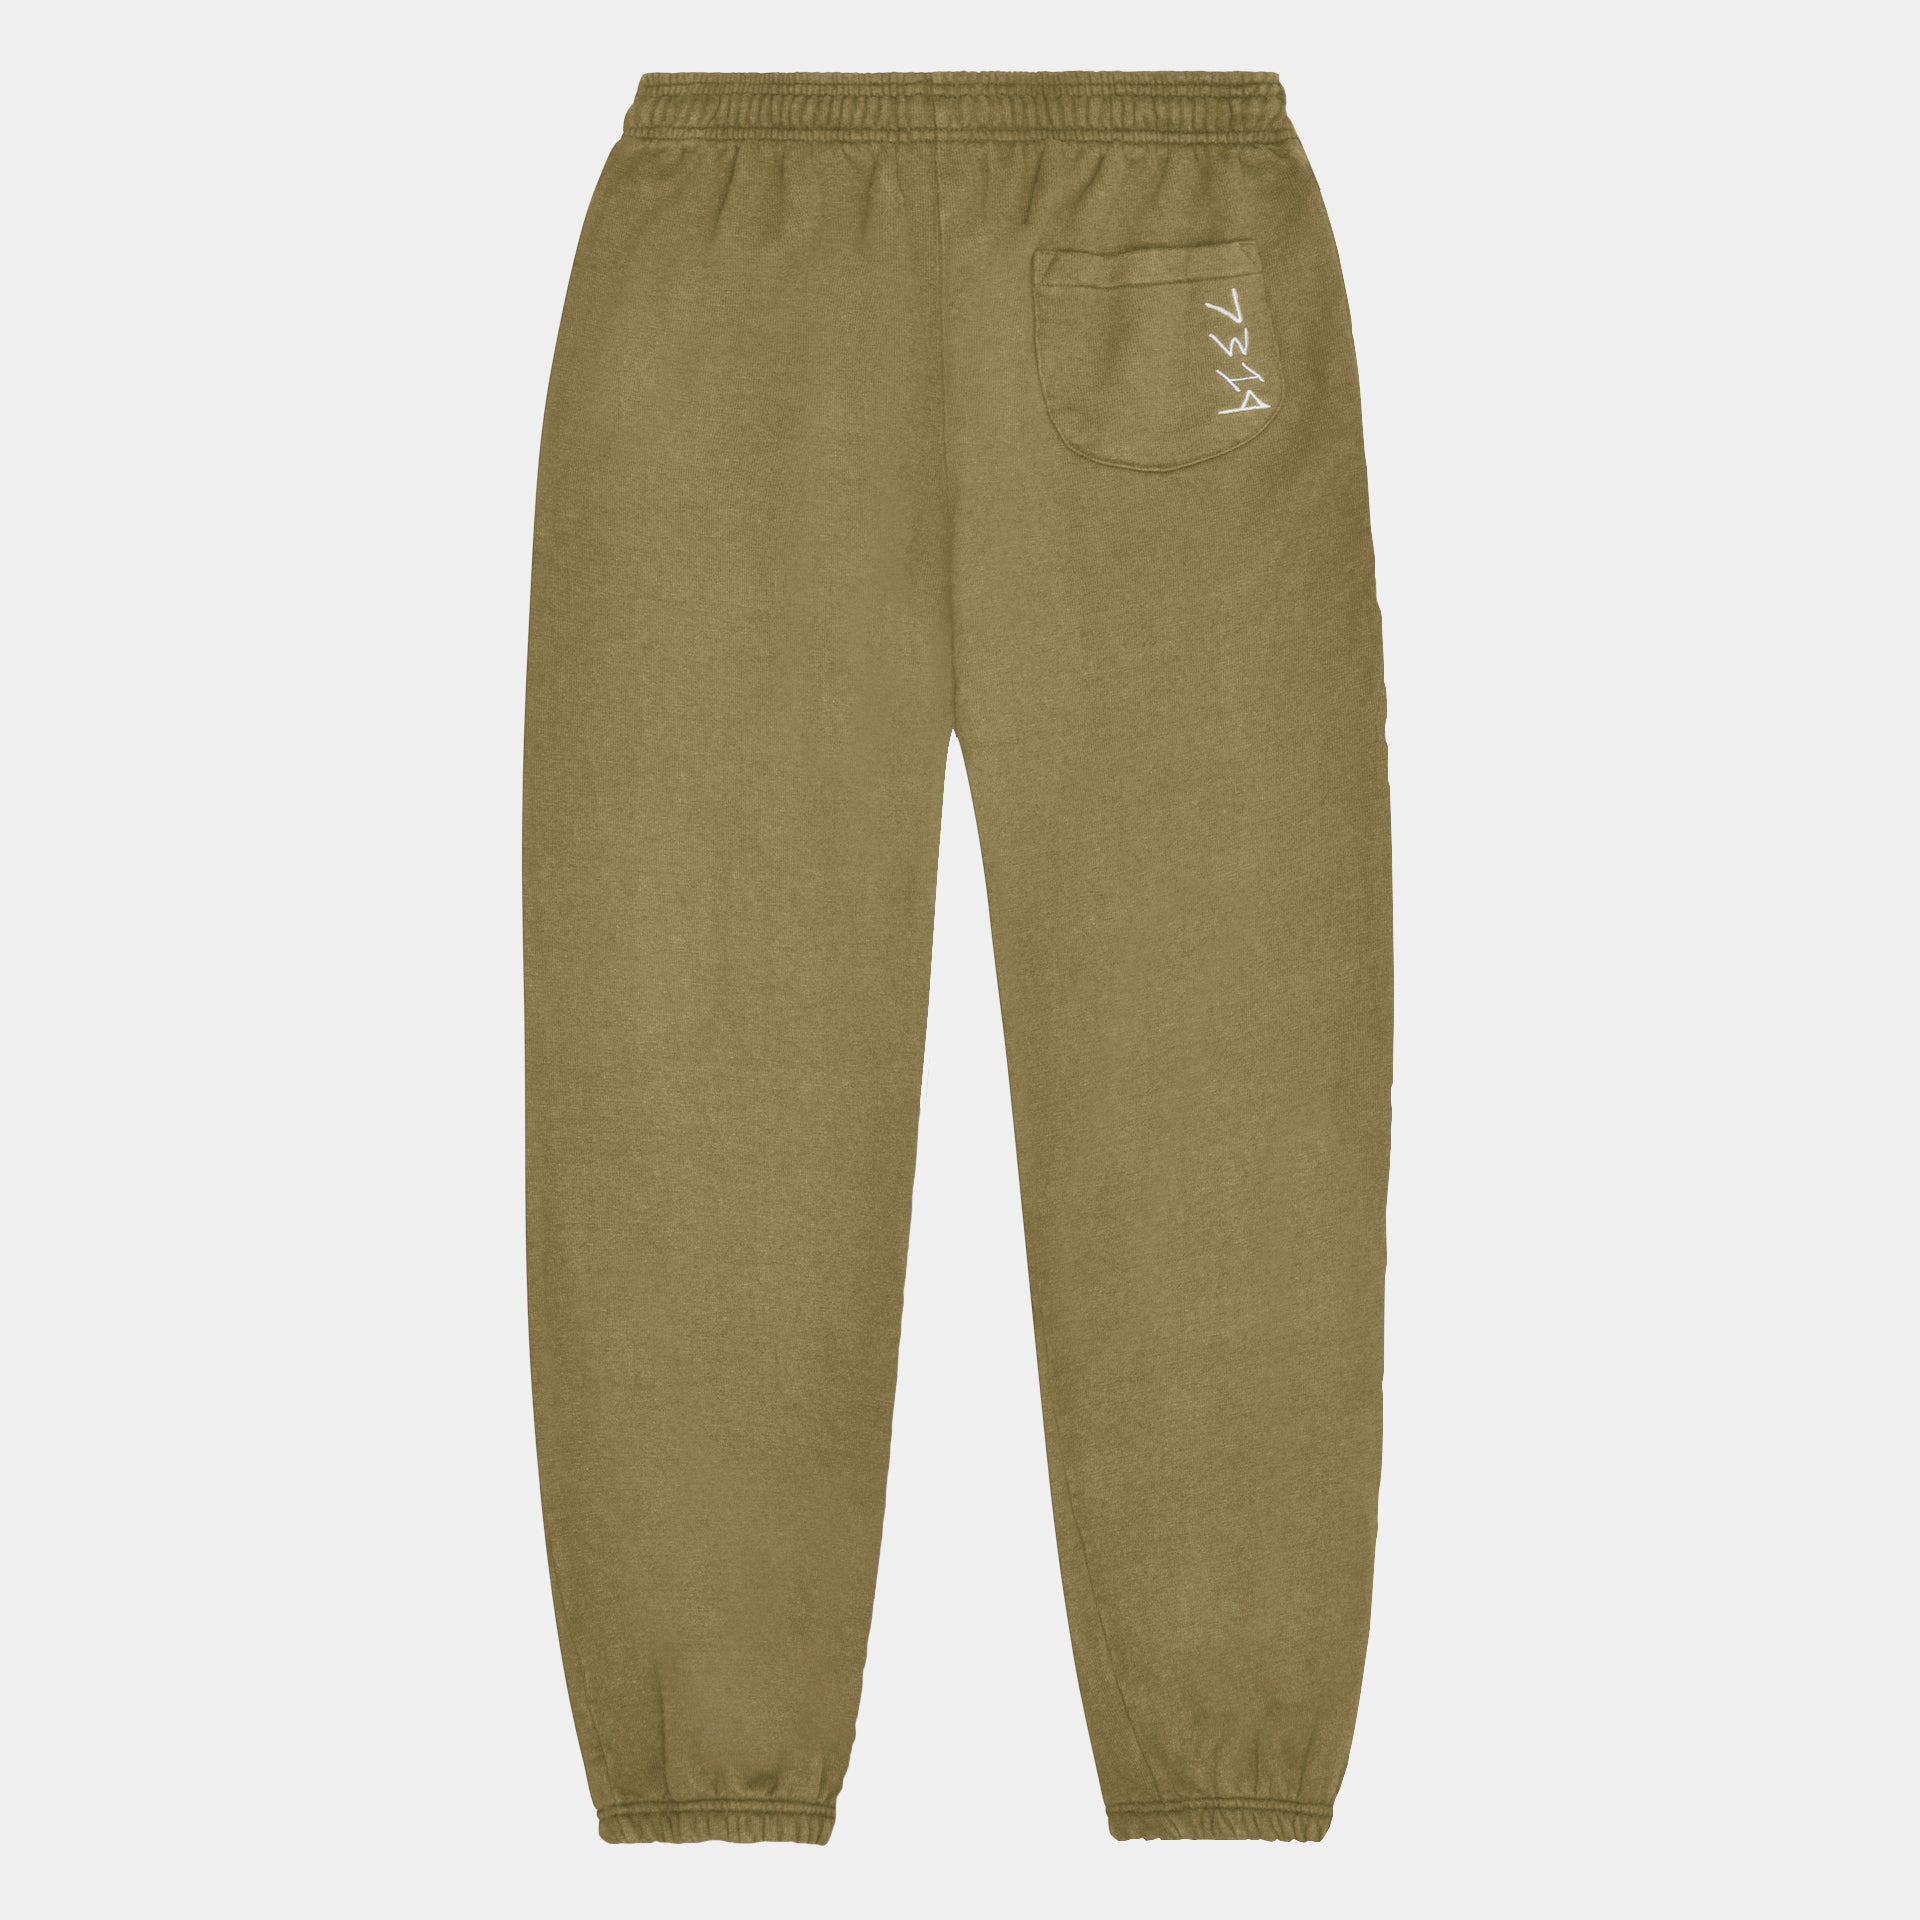 Olive green hemp sweatpants. Back view. Back pocket with white 7319 logo embroidered down right side. Sustainable workout attire. 